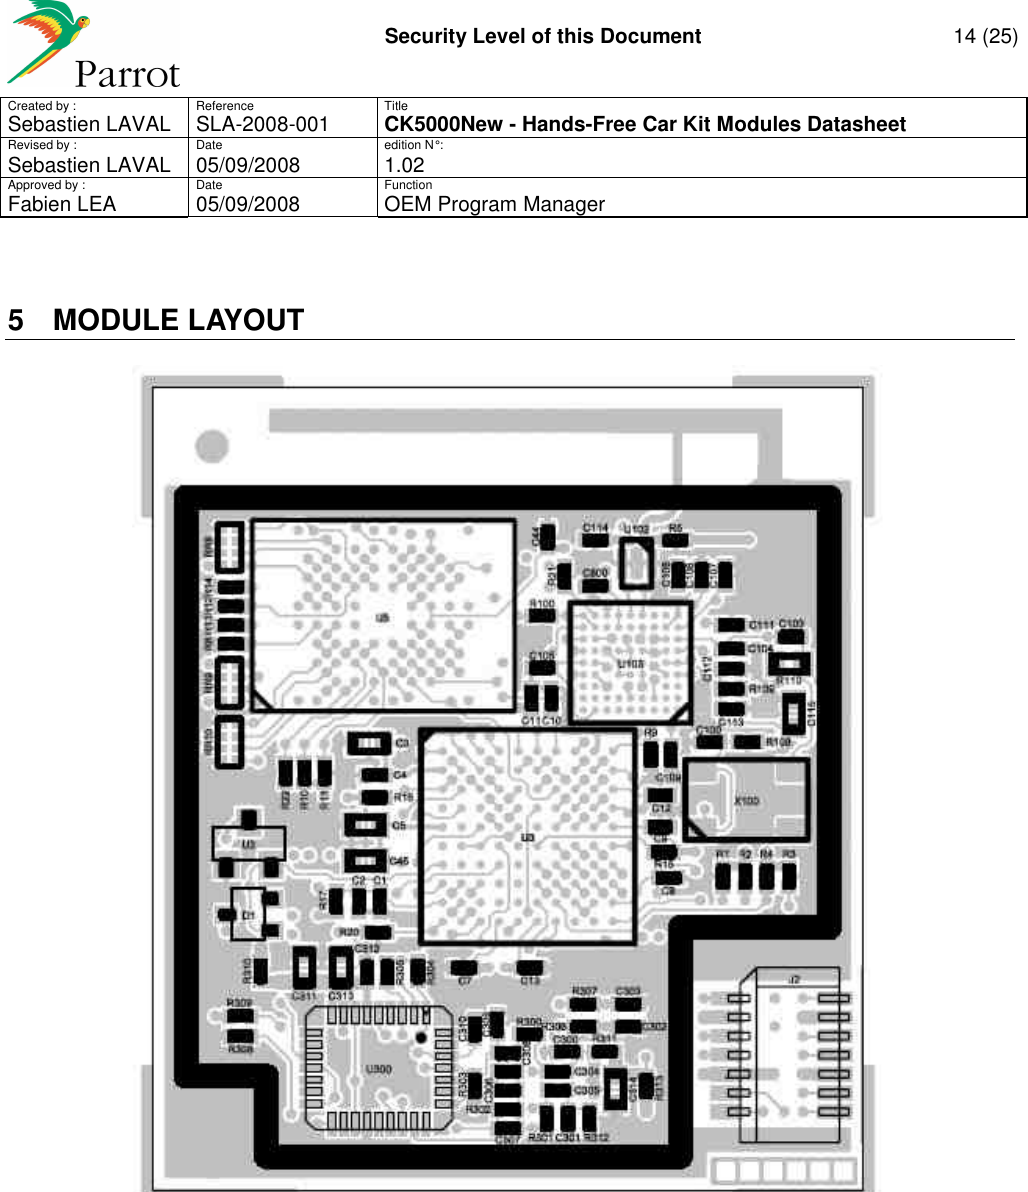     Security Level of this Document  14 (25) Created by :  Reference  Title Sebastien LAVAL   SLA-2008-001 CK5000New - Hands-Free Car Kit Modules Datasheet Revised by :  Date  edition N° : Sebastien LAVAL  05/09/2008  1.02 Approved by :  Date  Function     Fabien LEA  05/09/2008  OEM Program Manager   5  MODULE LAYOUT    